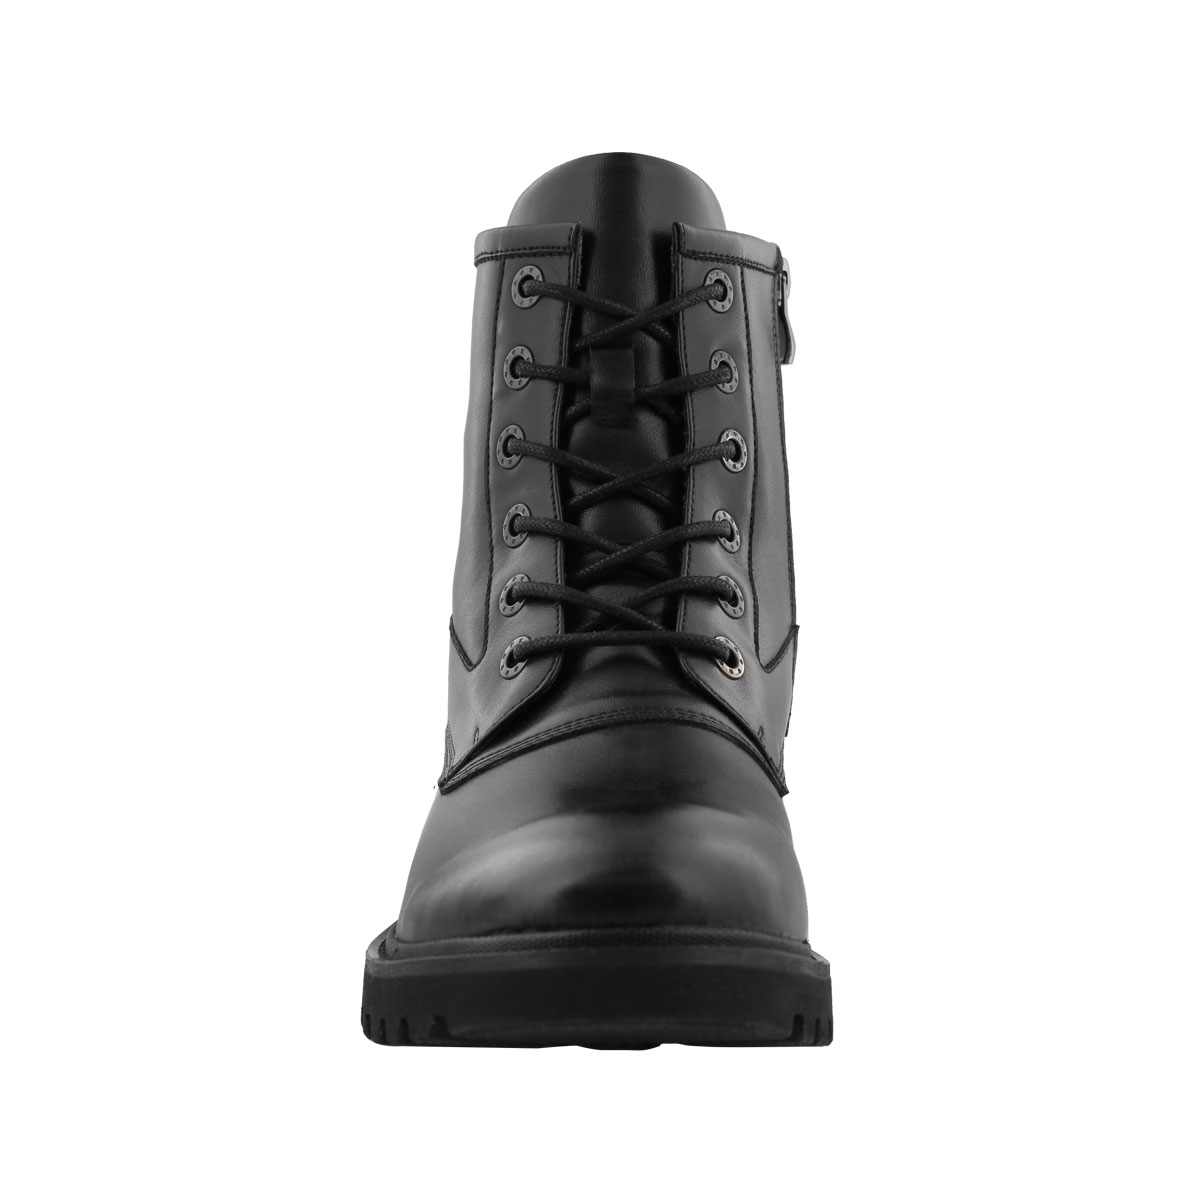 black lace up combat boot | SoftMoc 